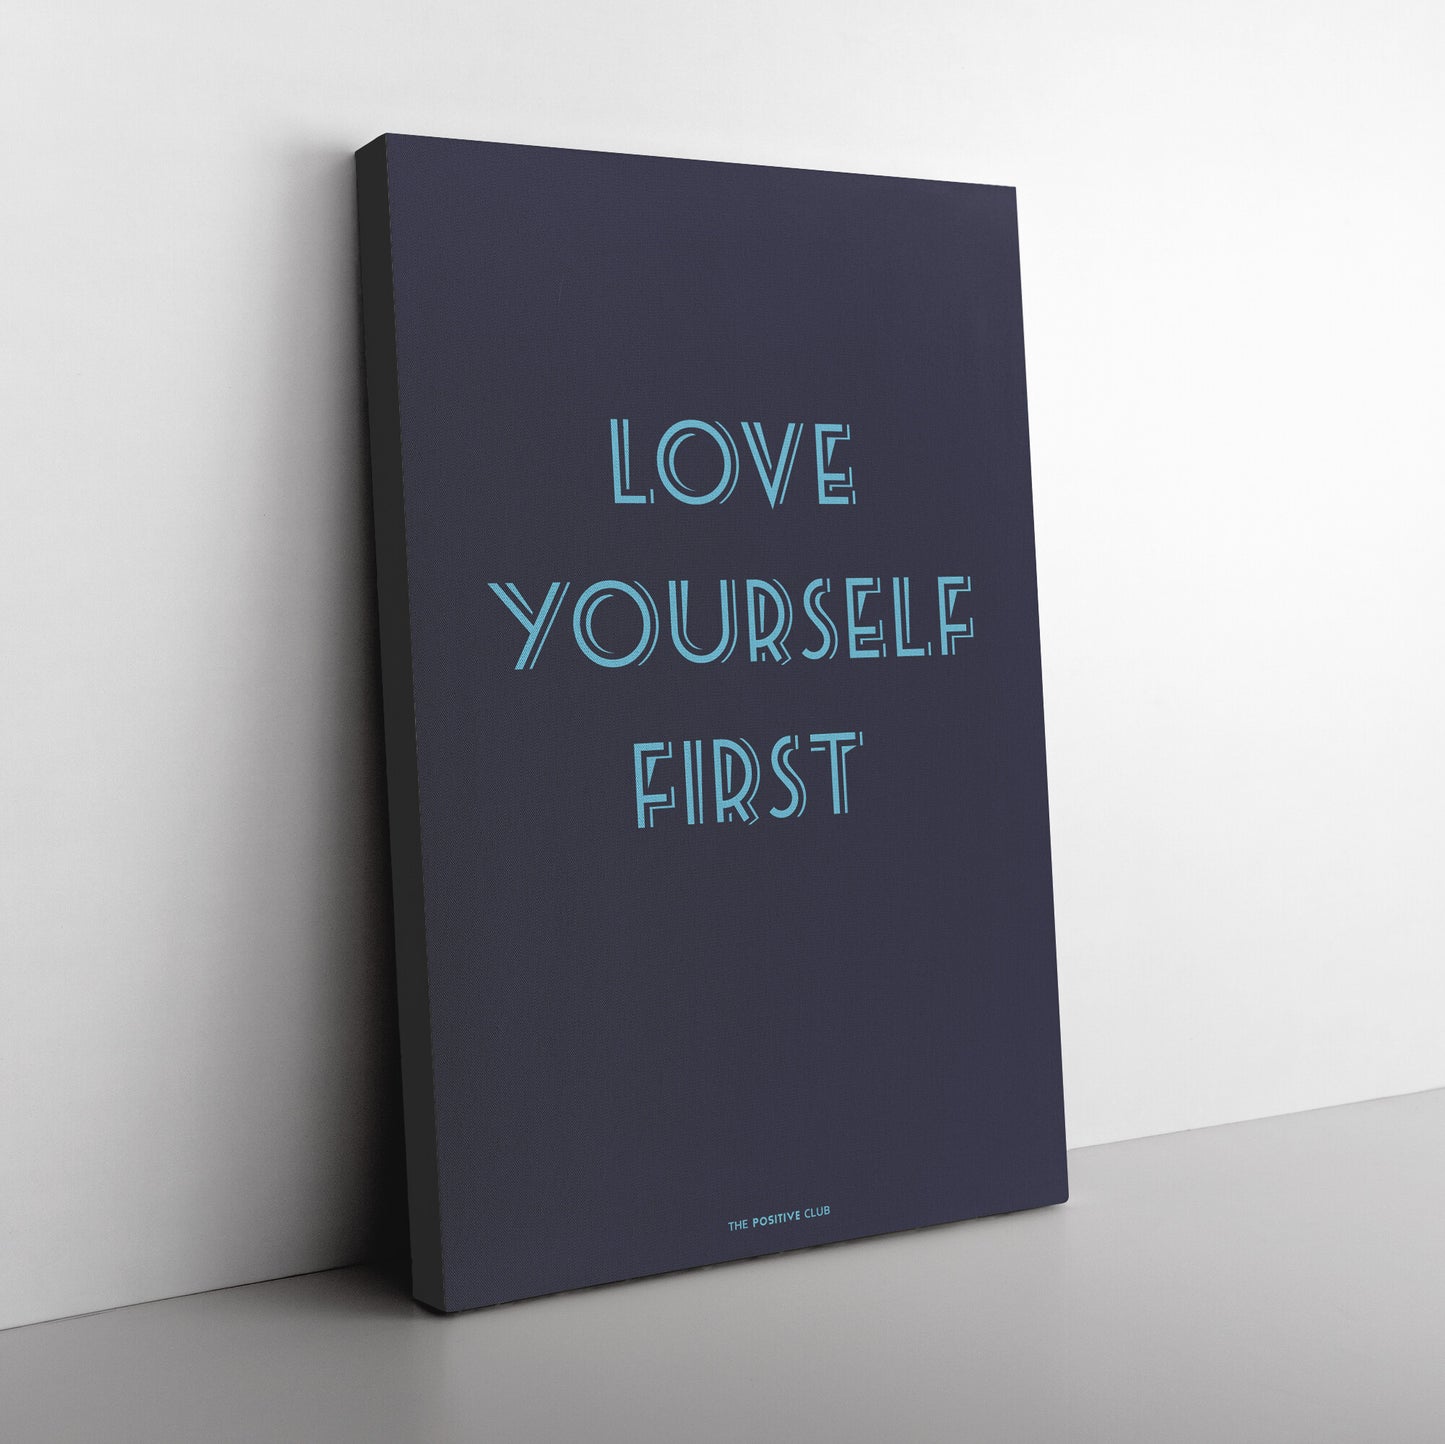 LOVE YOURSELF FIRST